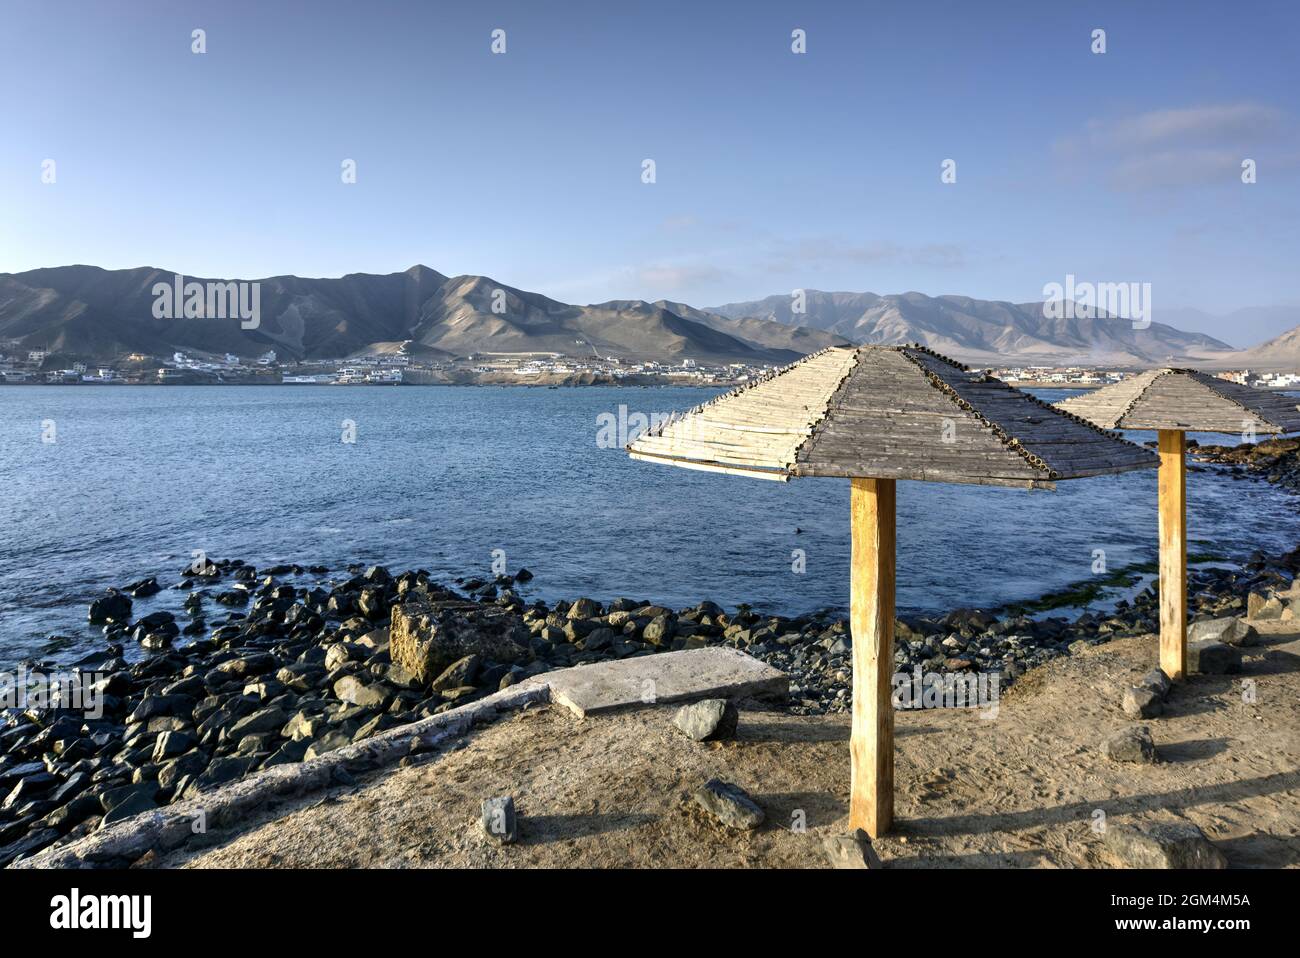 Tortugas, Casma, Peru - August 03, 2021: View of Tortugas across bay with mountains in background and umbrellas in foreground Stock Photo